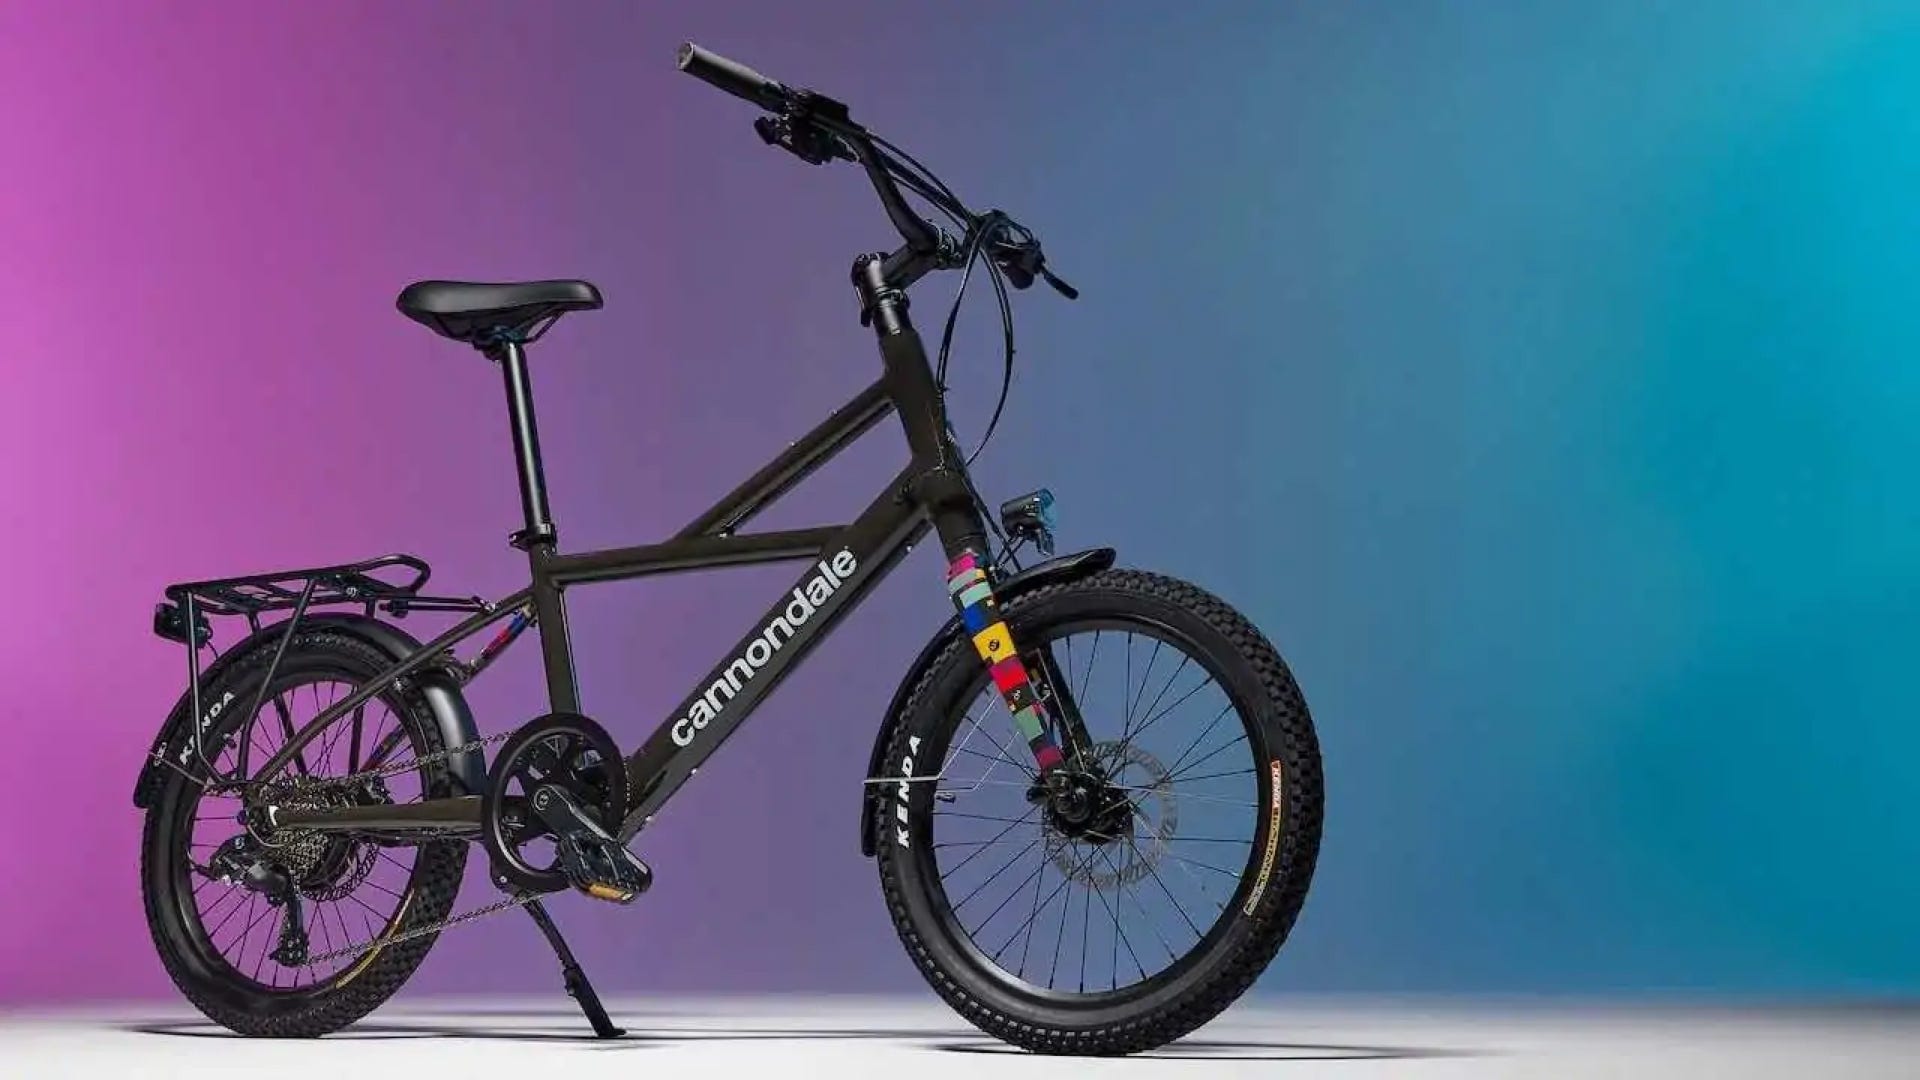 Cannondale Debuts the Compact Neo, Its Lightest Electric Bike – Review Geek